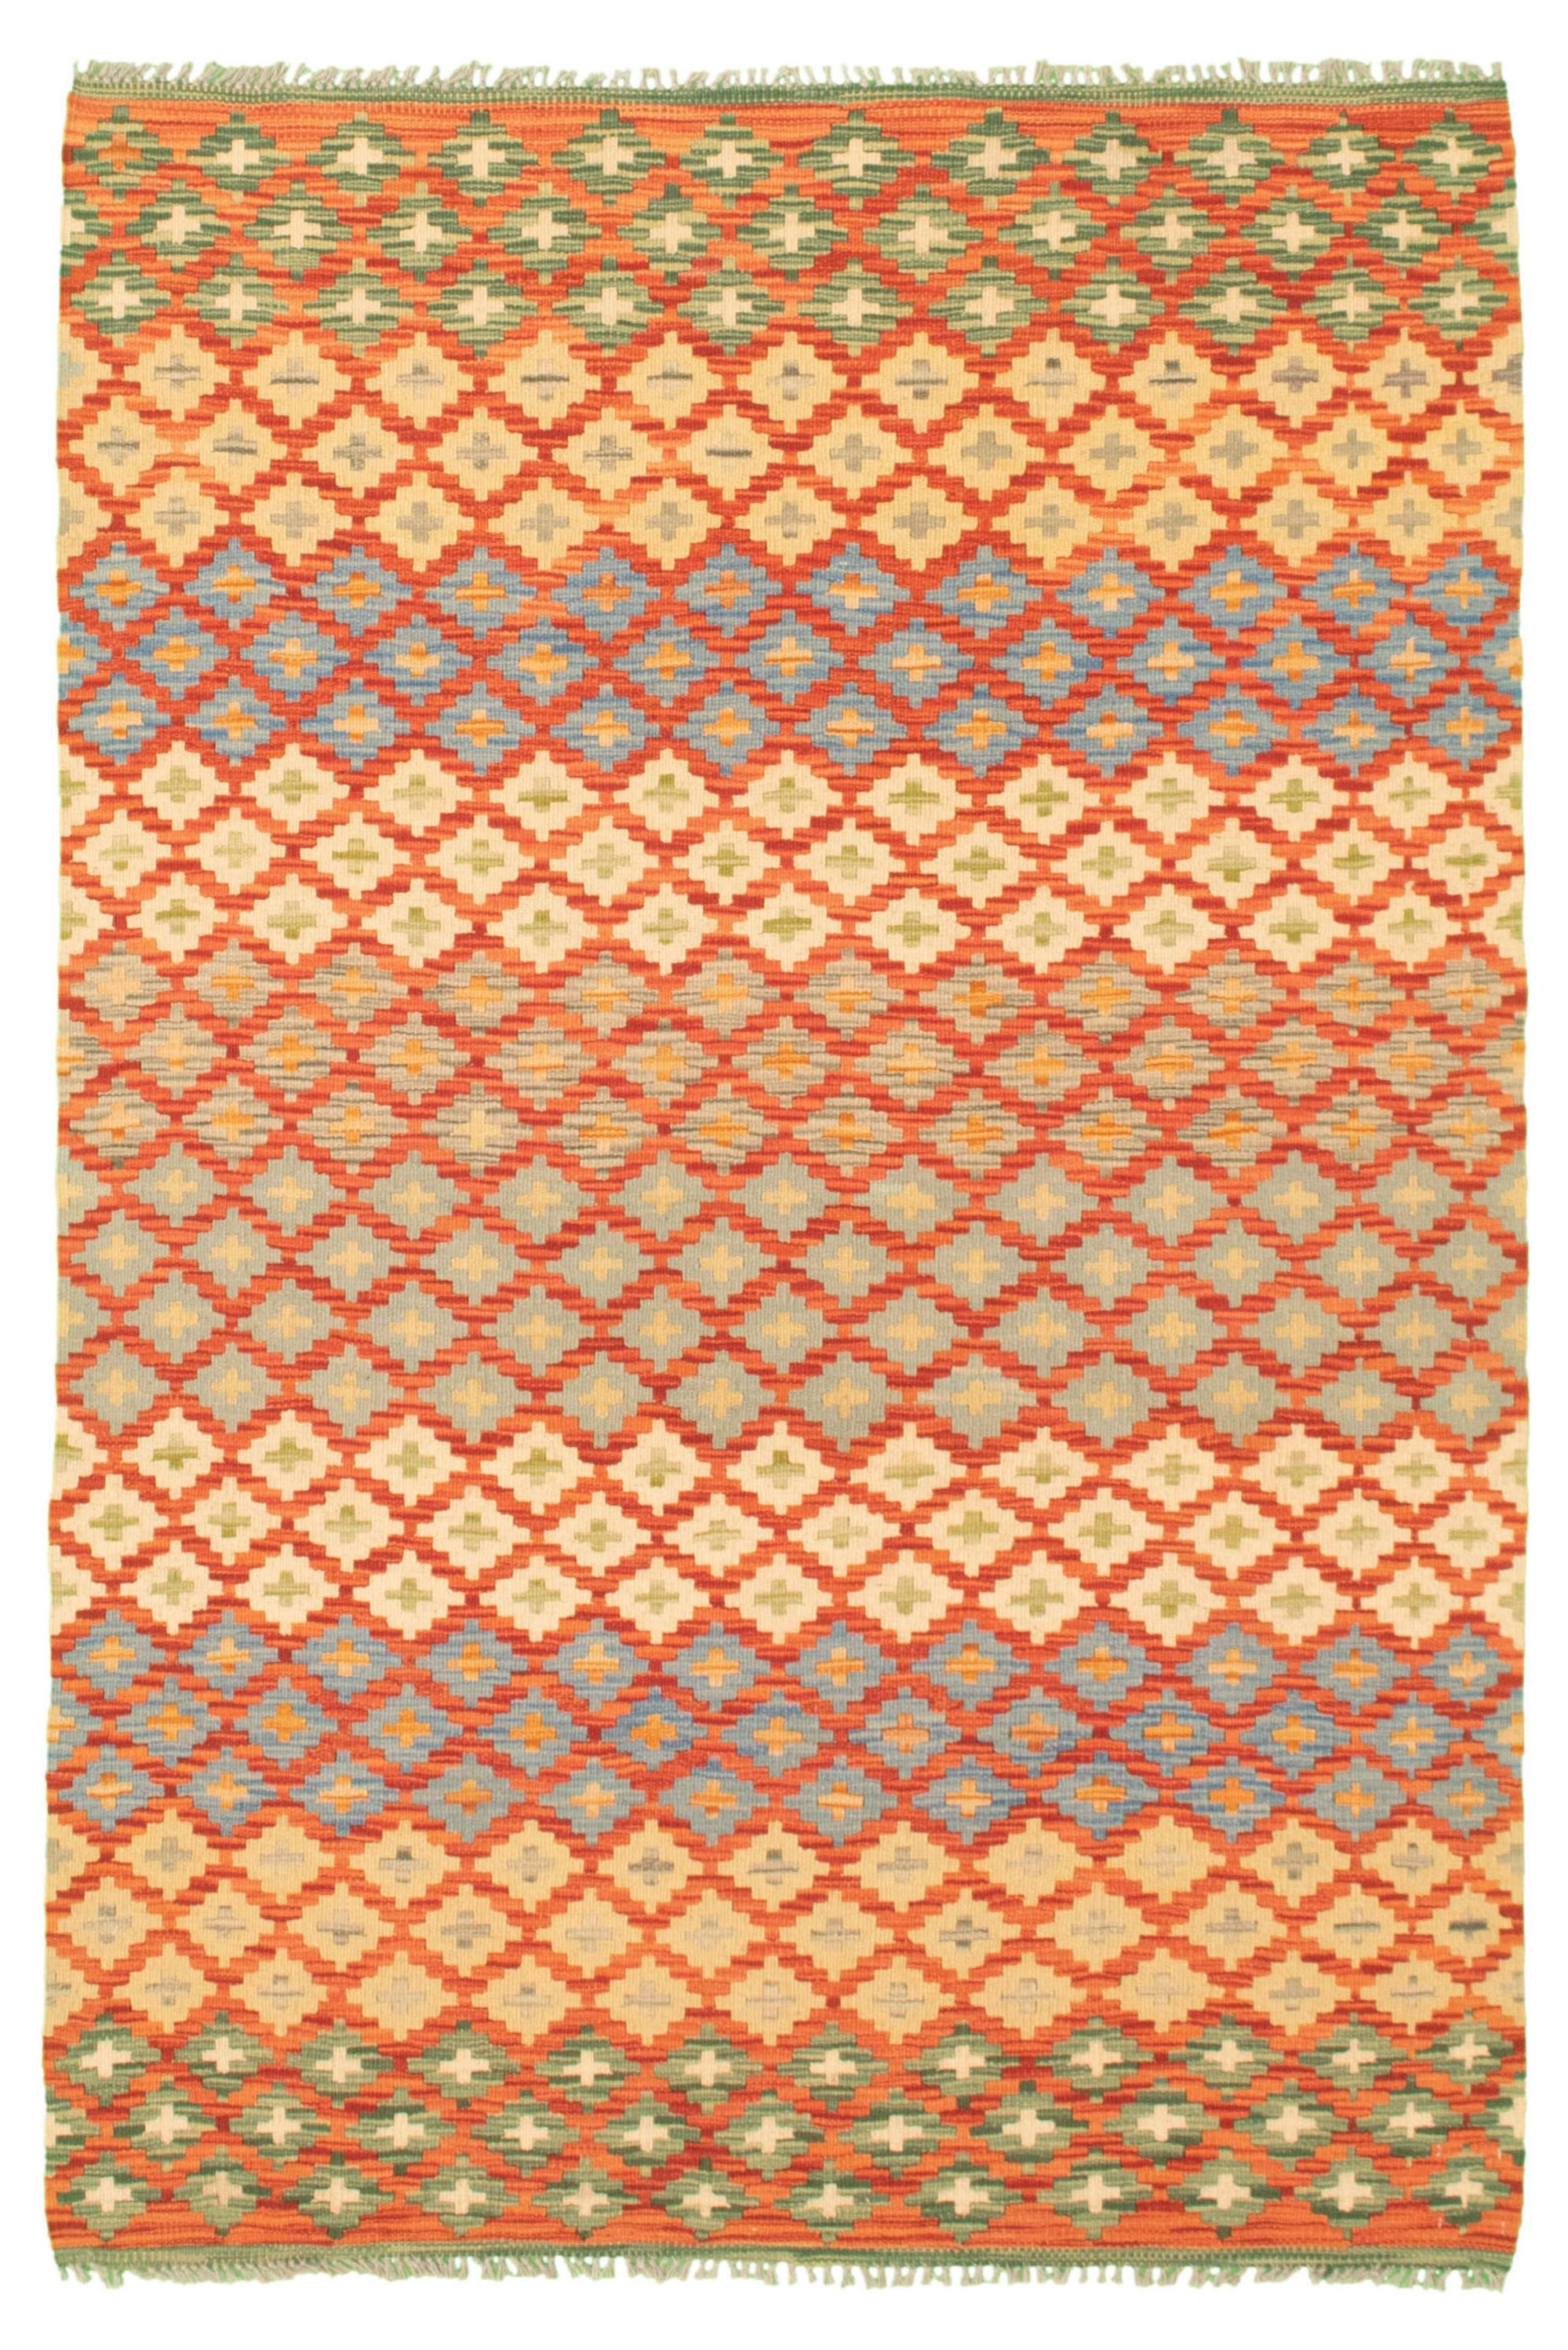 Hand woven Bold and Colorful  Dark Copper Wool Kilim 4'3" x 6'3" Size: 4'3" x 6'3"  